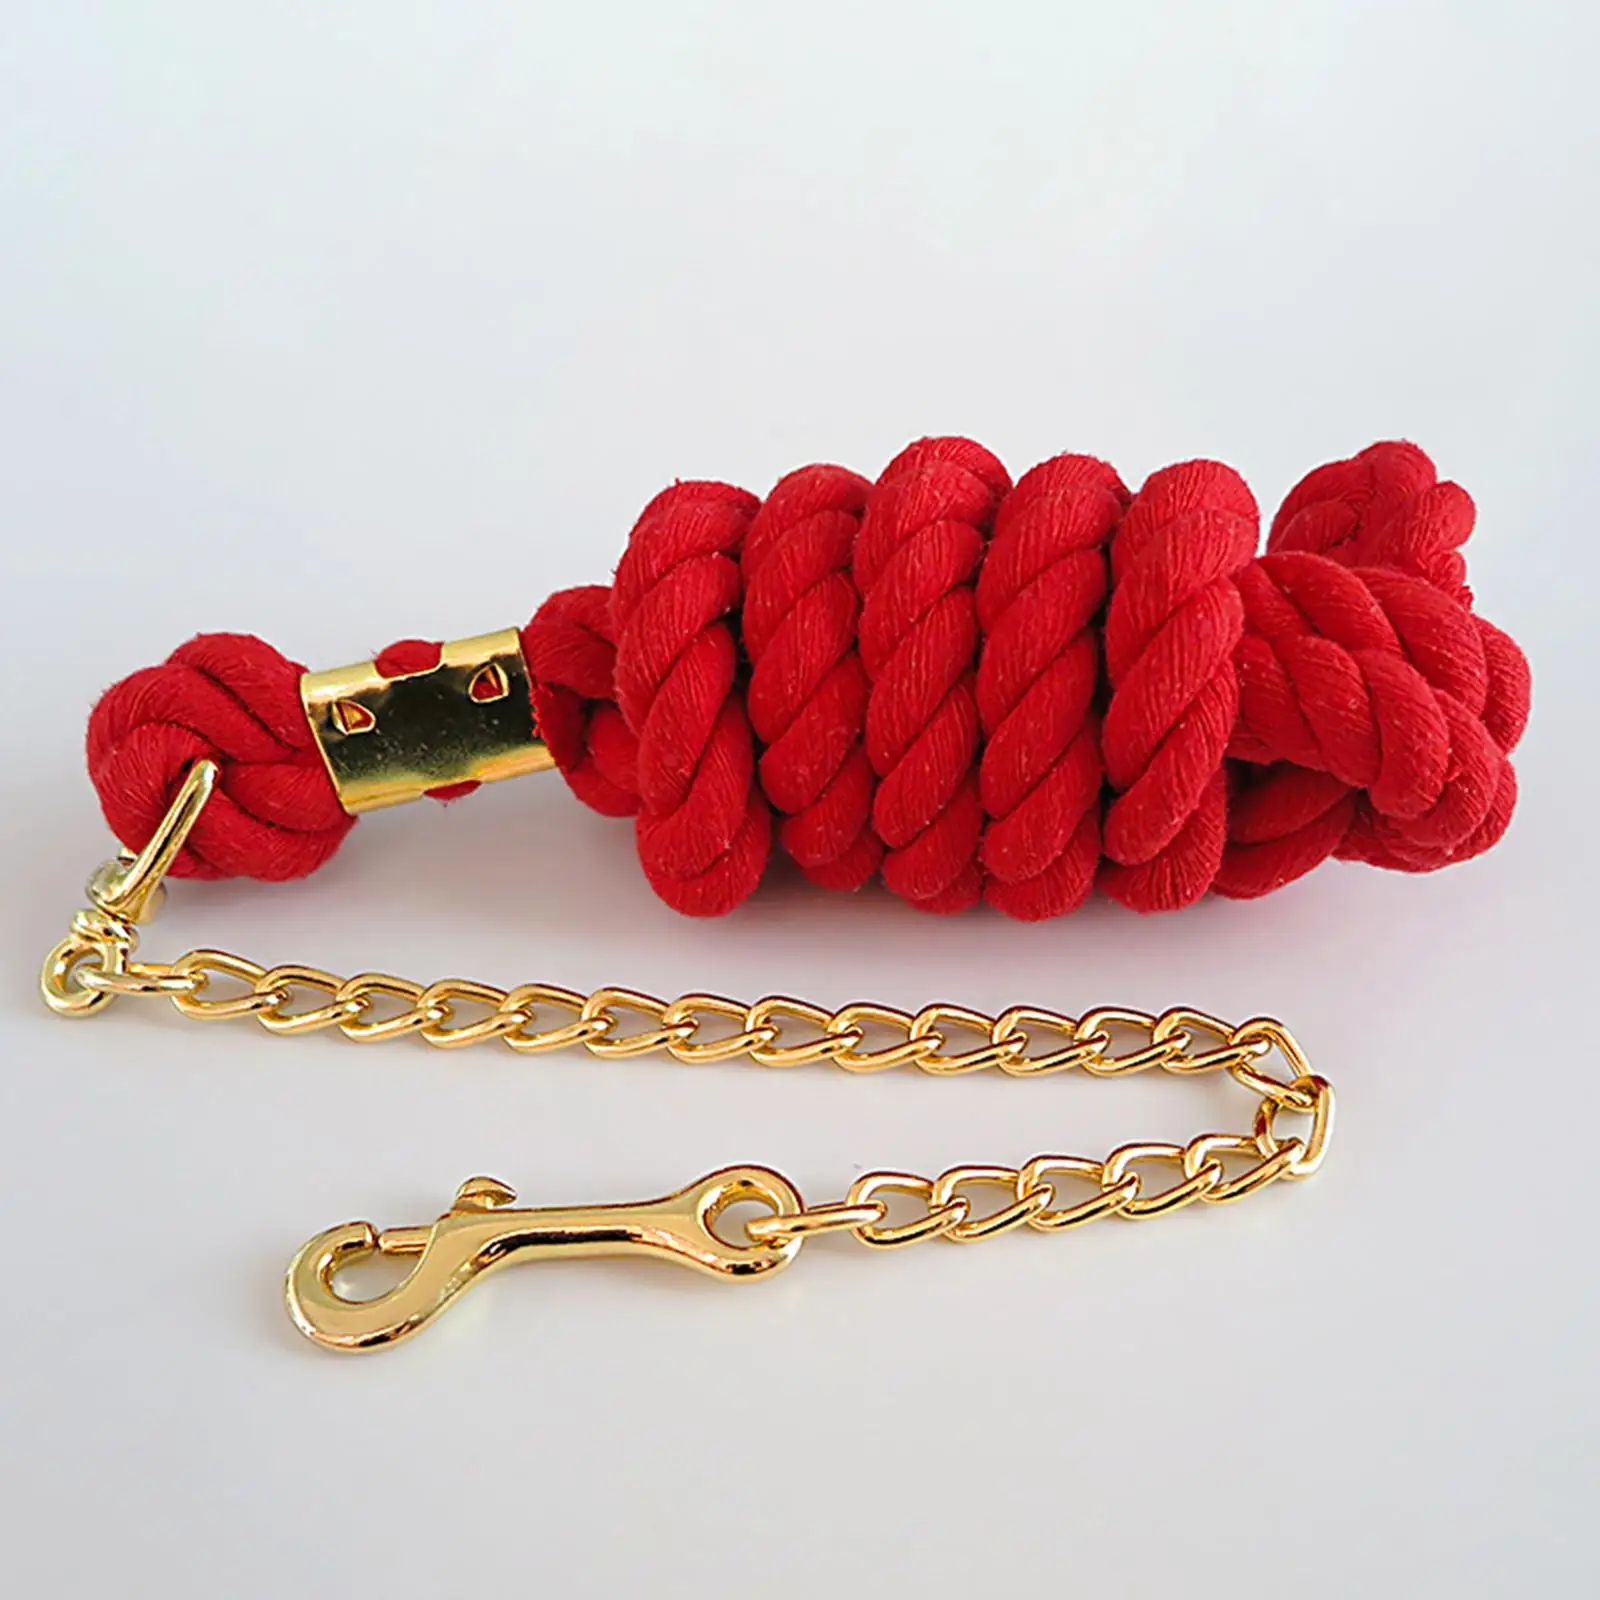 Solid   Leading Rope with Chain Swivel Buckle Bolt Snap Accessory